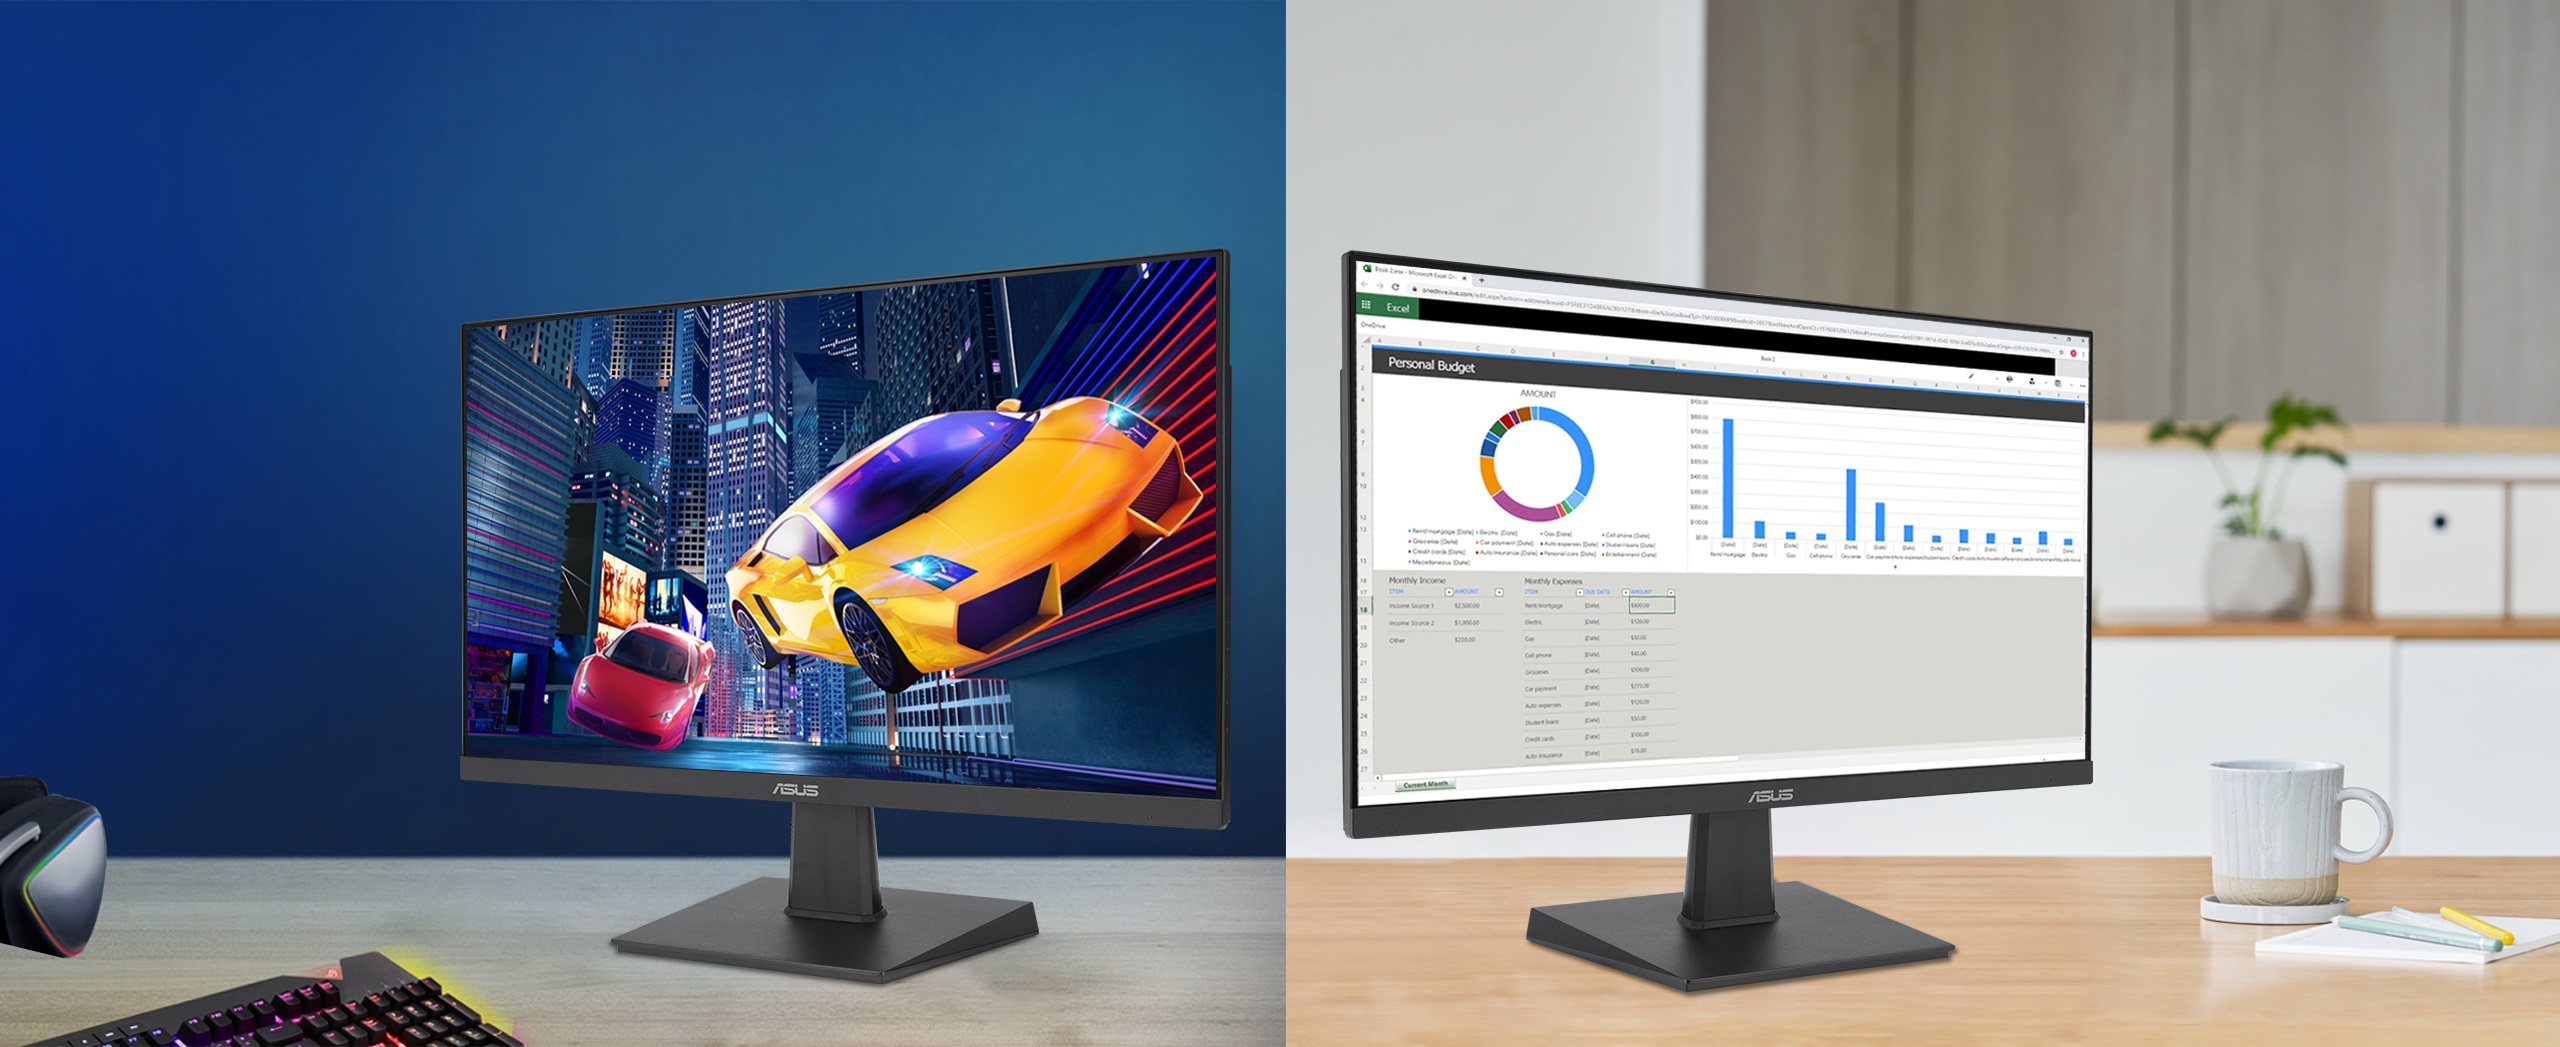 ASUS VA27EHF is 27-inch IPS Eye Care Gaming monitor with fast 100Hz refresh rate and Adaptive-Sync technology to eliminate screen tearing and choppy frame rates for the smoother-than-ever experience.